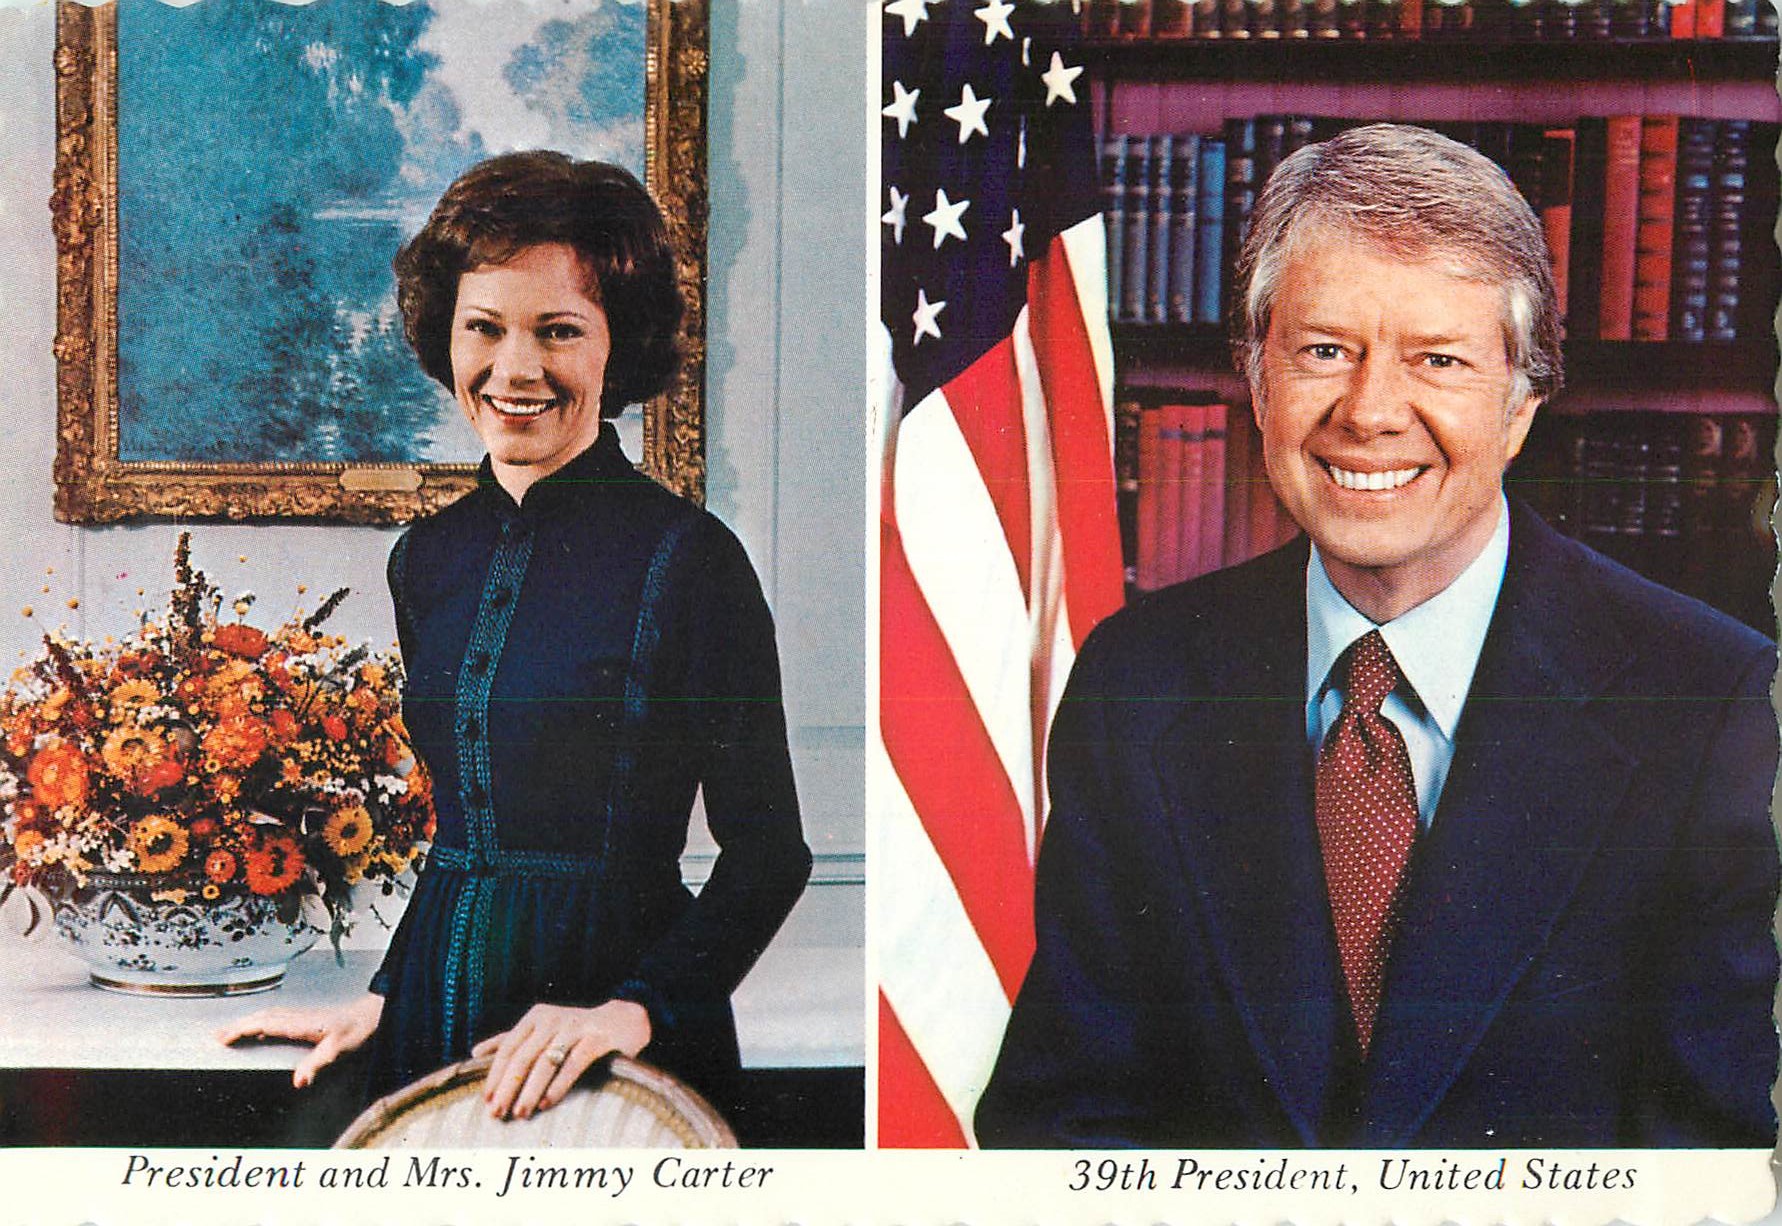 "39th President Carter and Mrs. Carter"